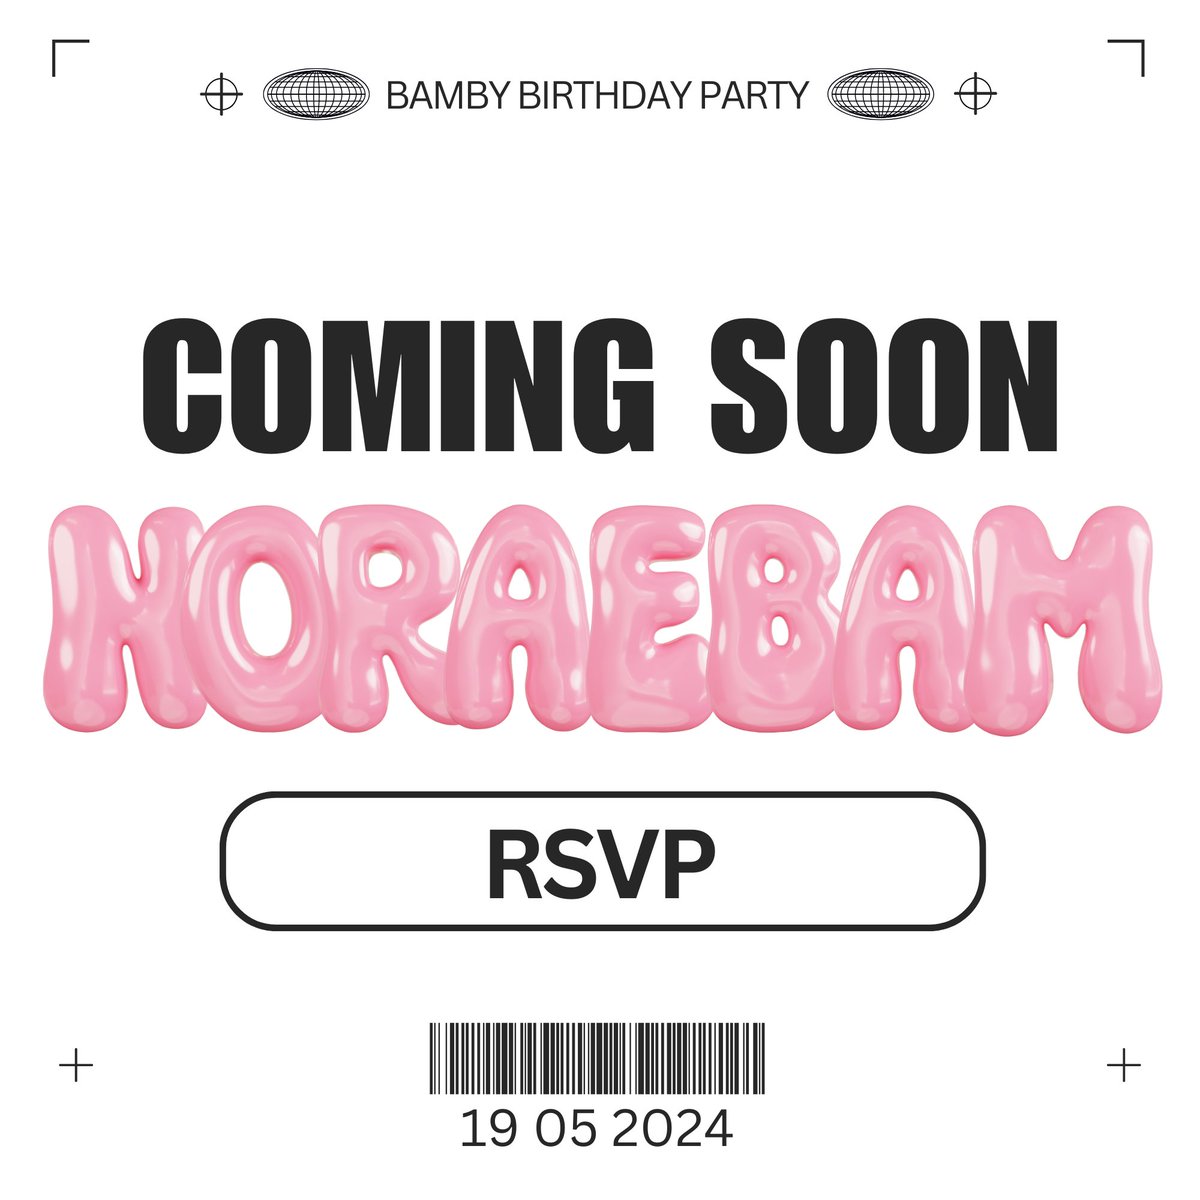 Are you ready??
Eh.... Where is my songlists??

#Noraebam #happyBambyDay2024